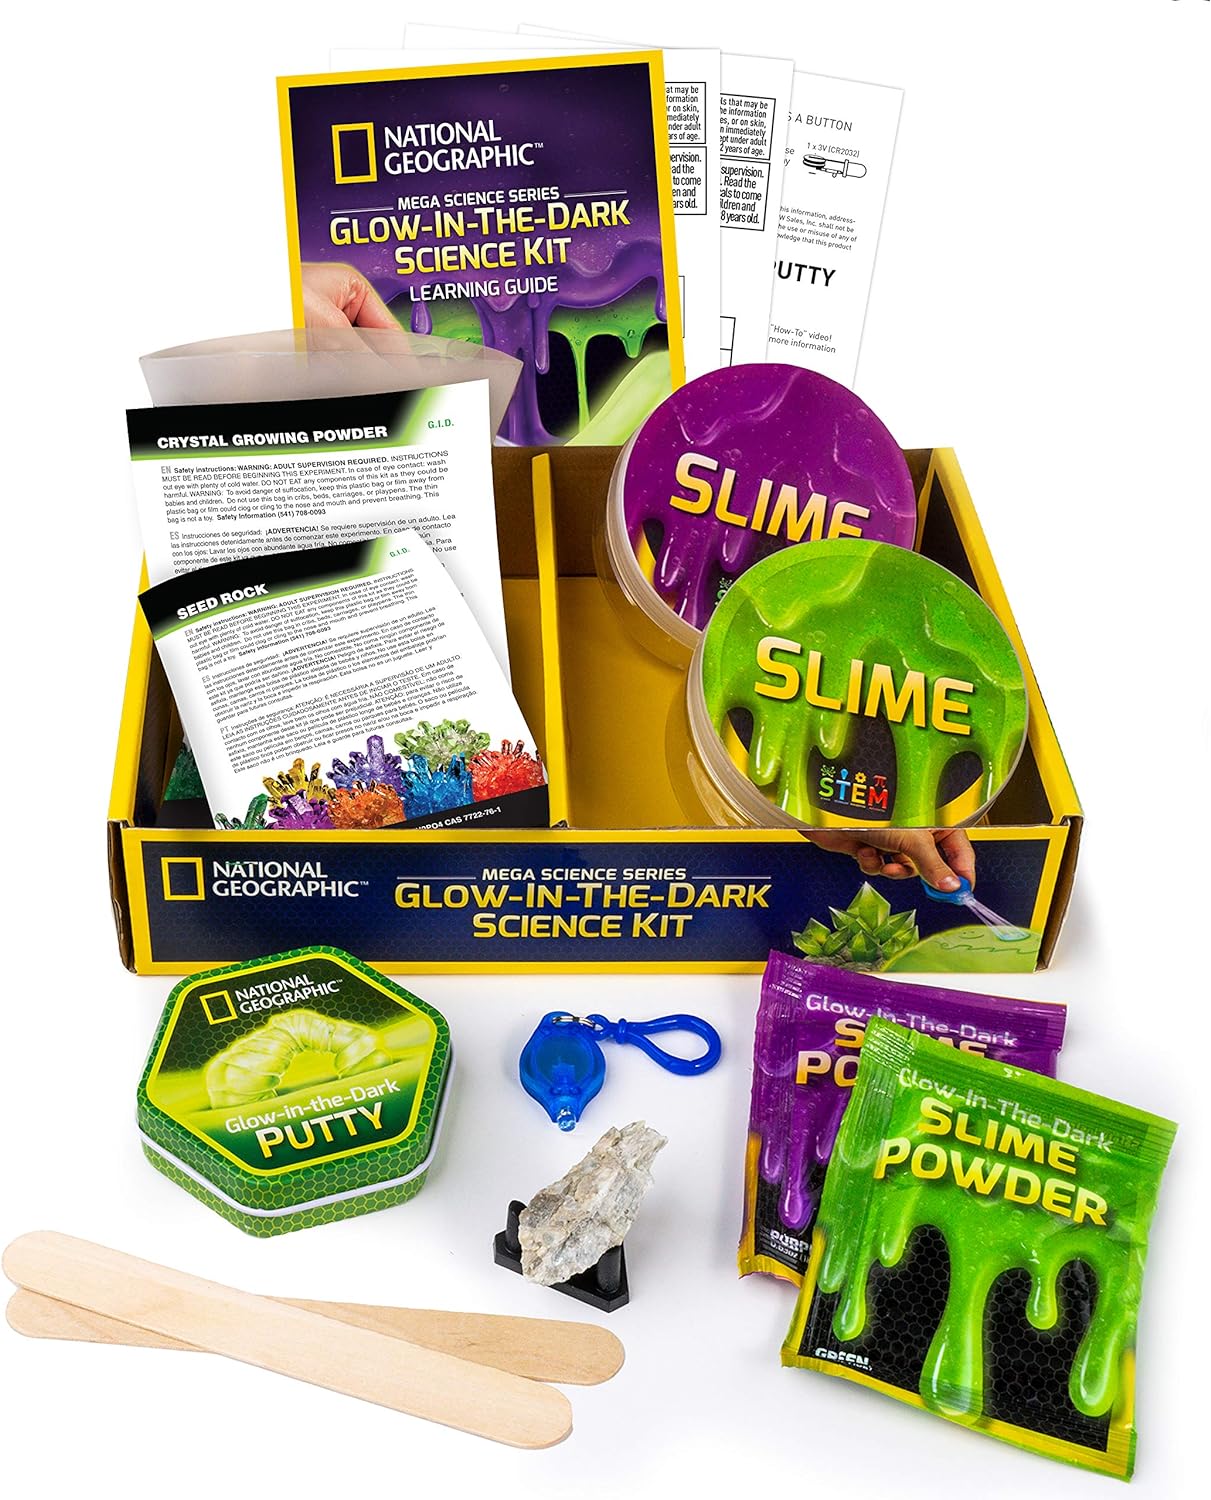 NATIONAL GEOGRAPHIC Earth Science Kit - Over 15 Science Experiments for Kids, Crystal Growing Kit, Volcano Science Kit, Dig Kits Gemstones, STEM Project Toy for Boys and Girls (Amazon Exclusive)